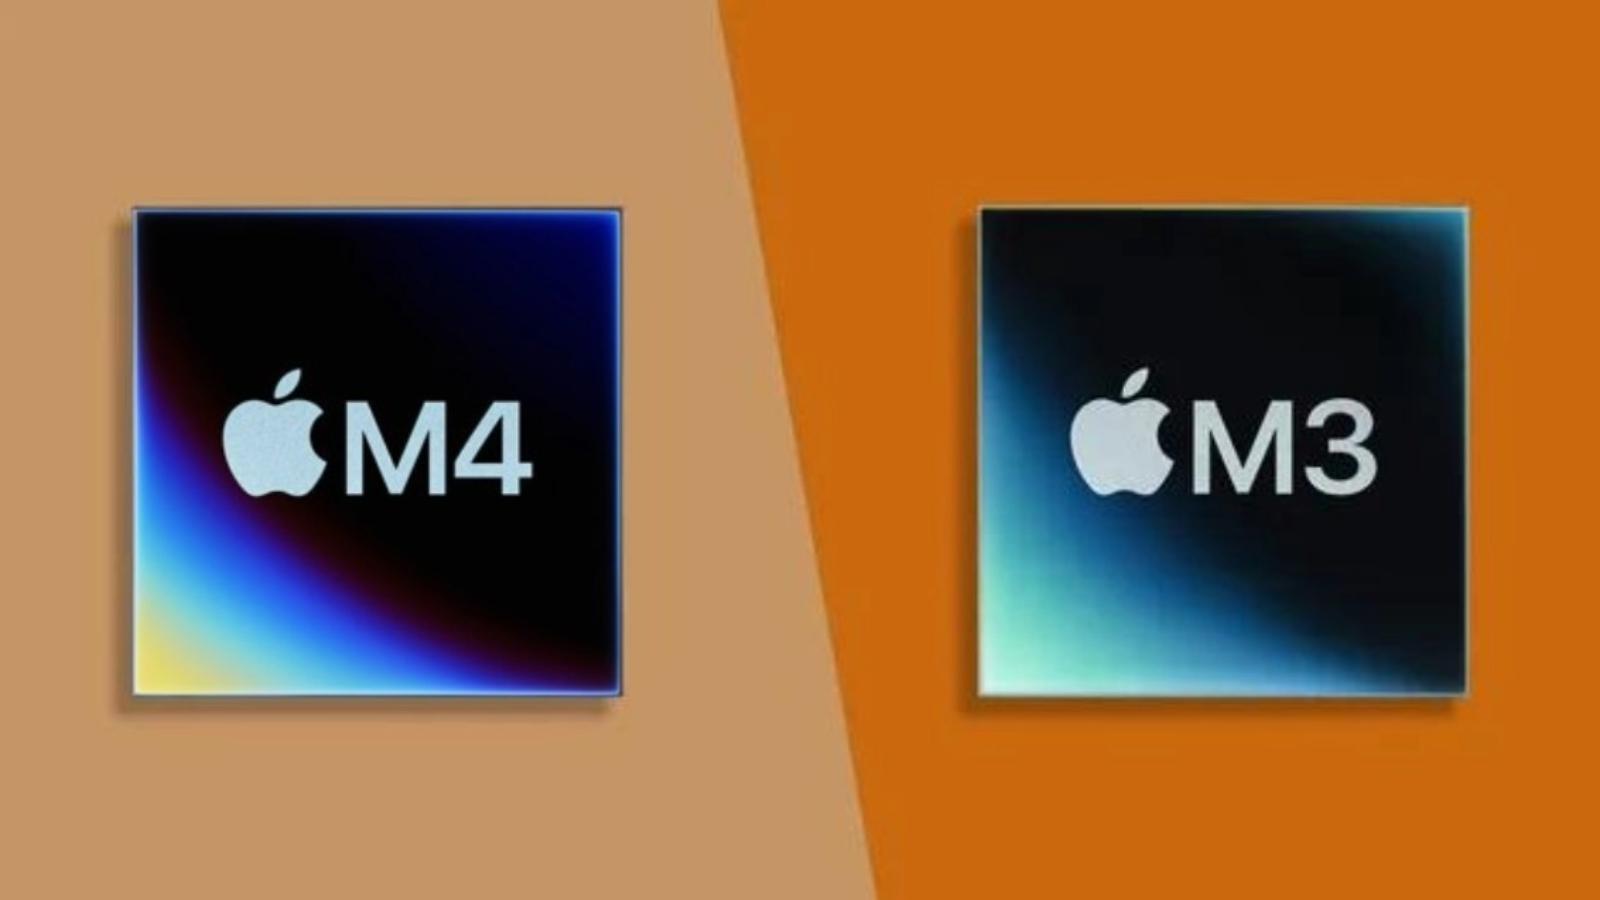 Image showing M4 and M3 logos next to each other